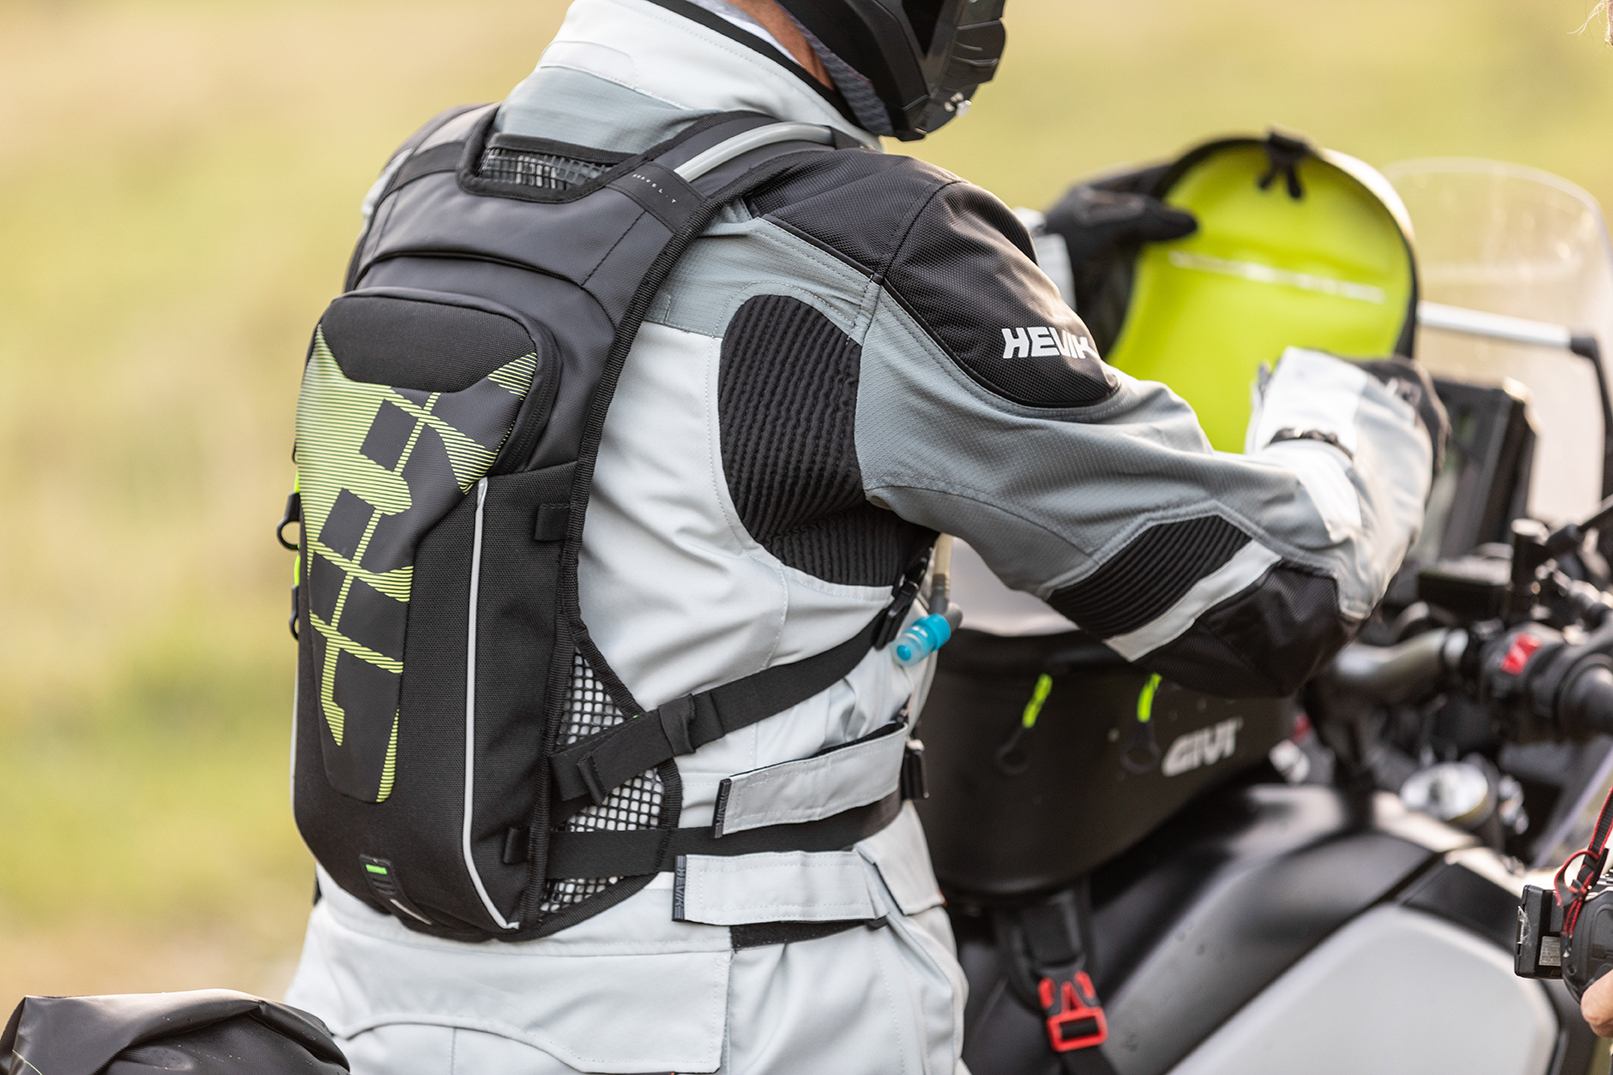 TO+ALL+OF+THE+OFF-ROAD+ENTHUSIASTS%2C+GIVI+PRESENTS+THE+NEW+GRT719%2C+A+RUCKSACK+WITH+AN+INTEGRATED+WATER+BAG%2C+AND+THE+HYDRAPAK+ELITE+T523+BAG%21